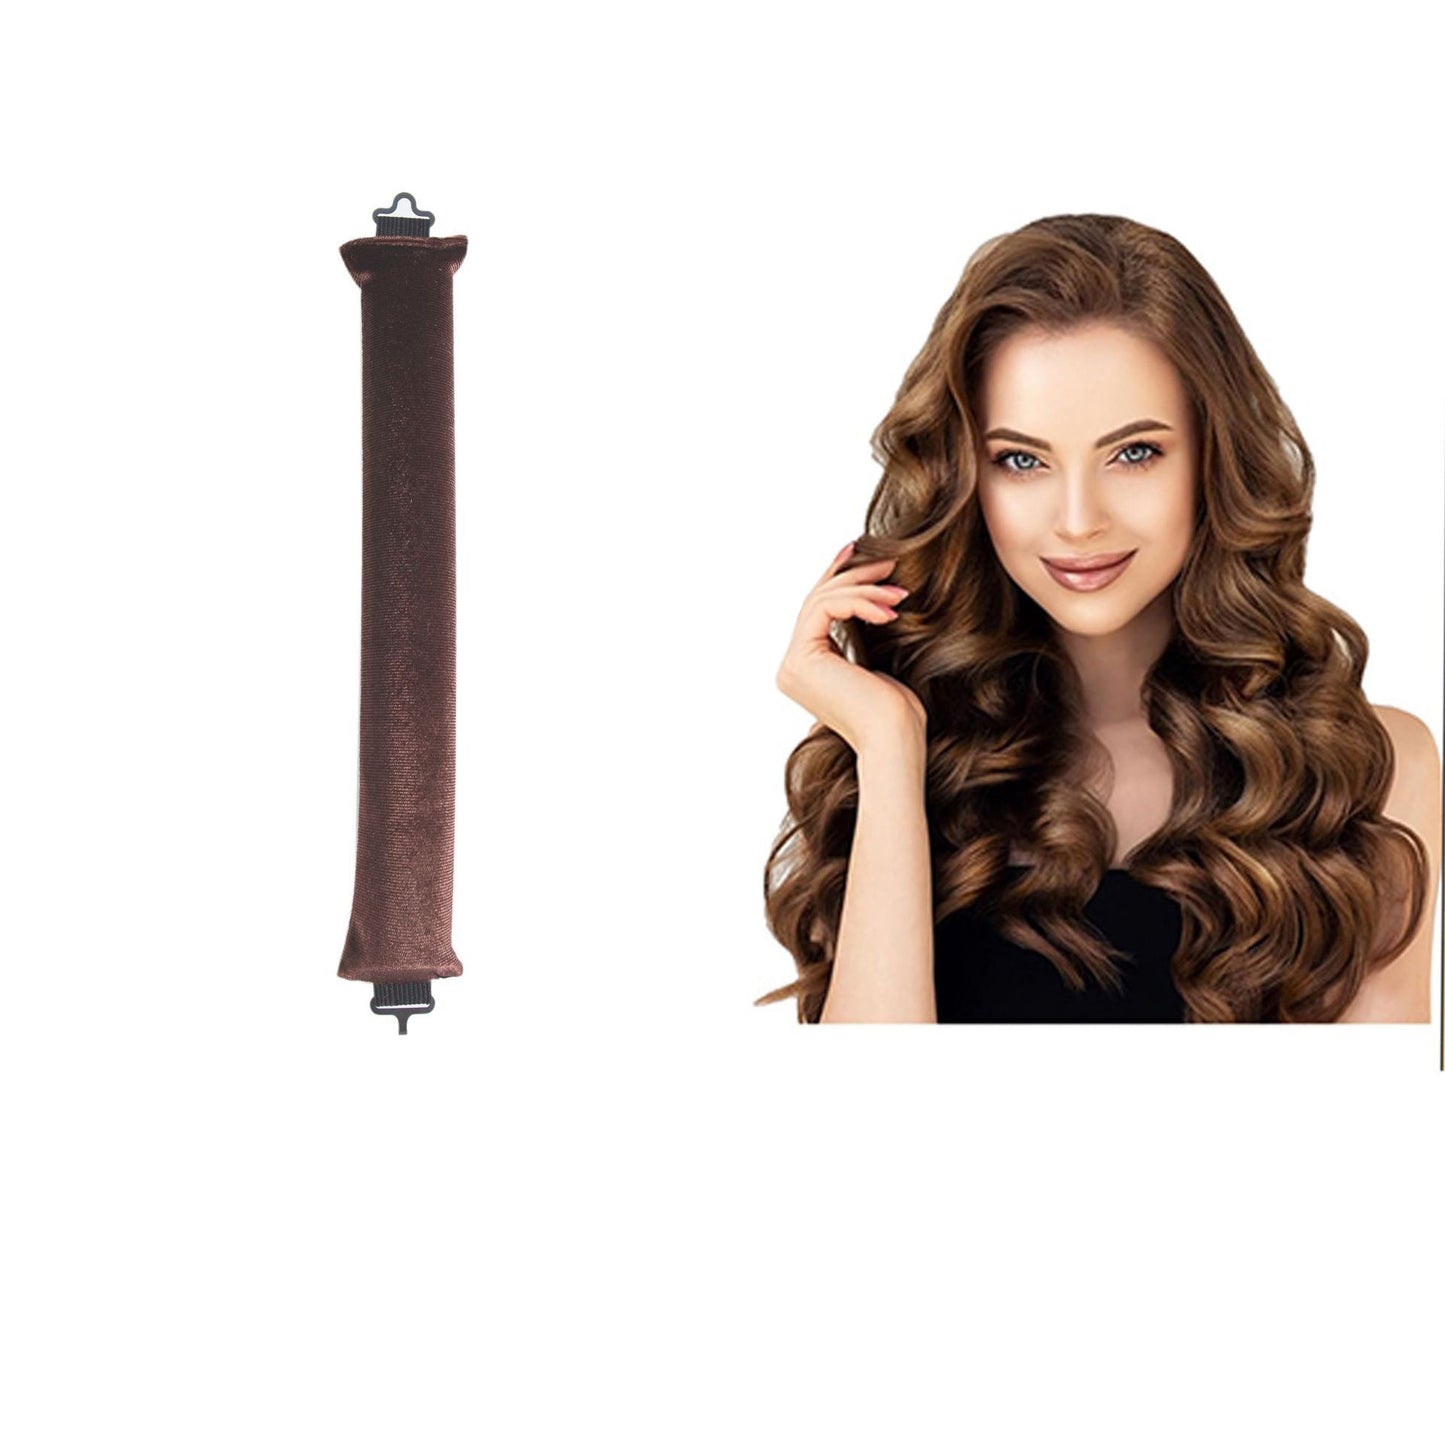 Thick 3cm Sleep Hair Curler Suitable For Dry Hair Heatless Hair Curlers for Long and Medium Hair,Silk Curls Headband with Gift Box,Satin Curling Rod Headband,No Heat Rollers to Sleep in Overnight